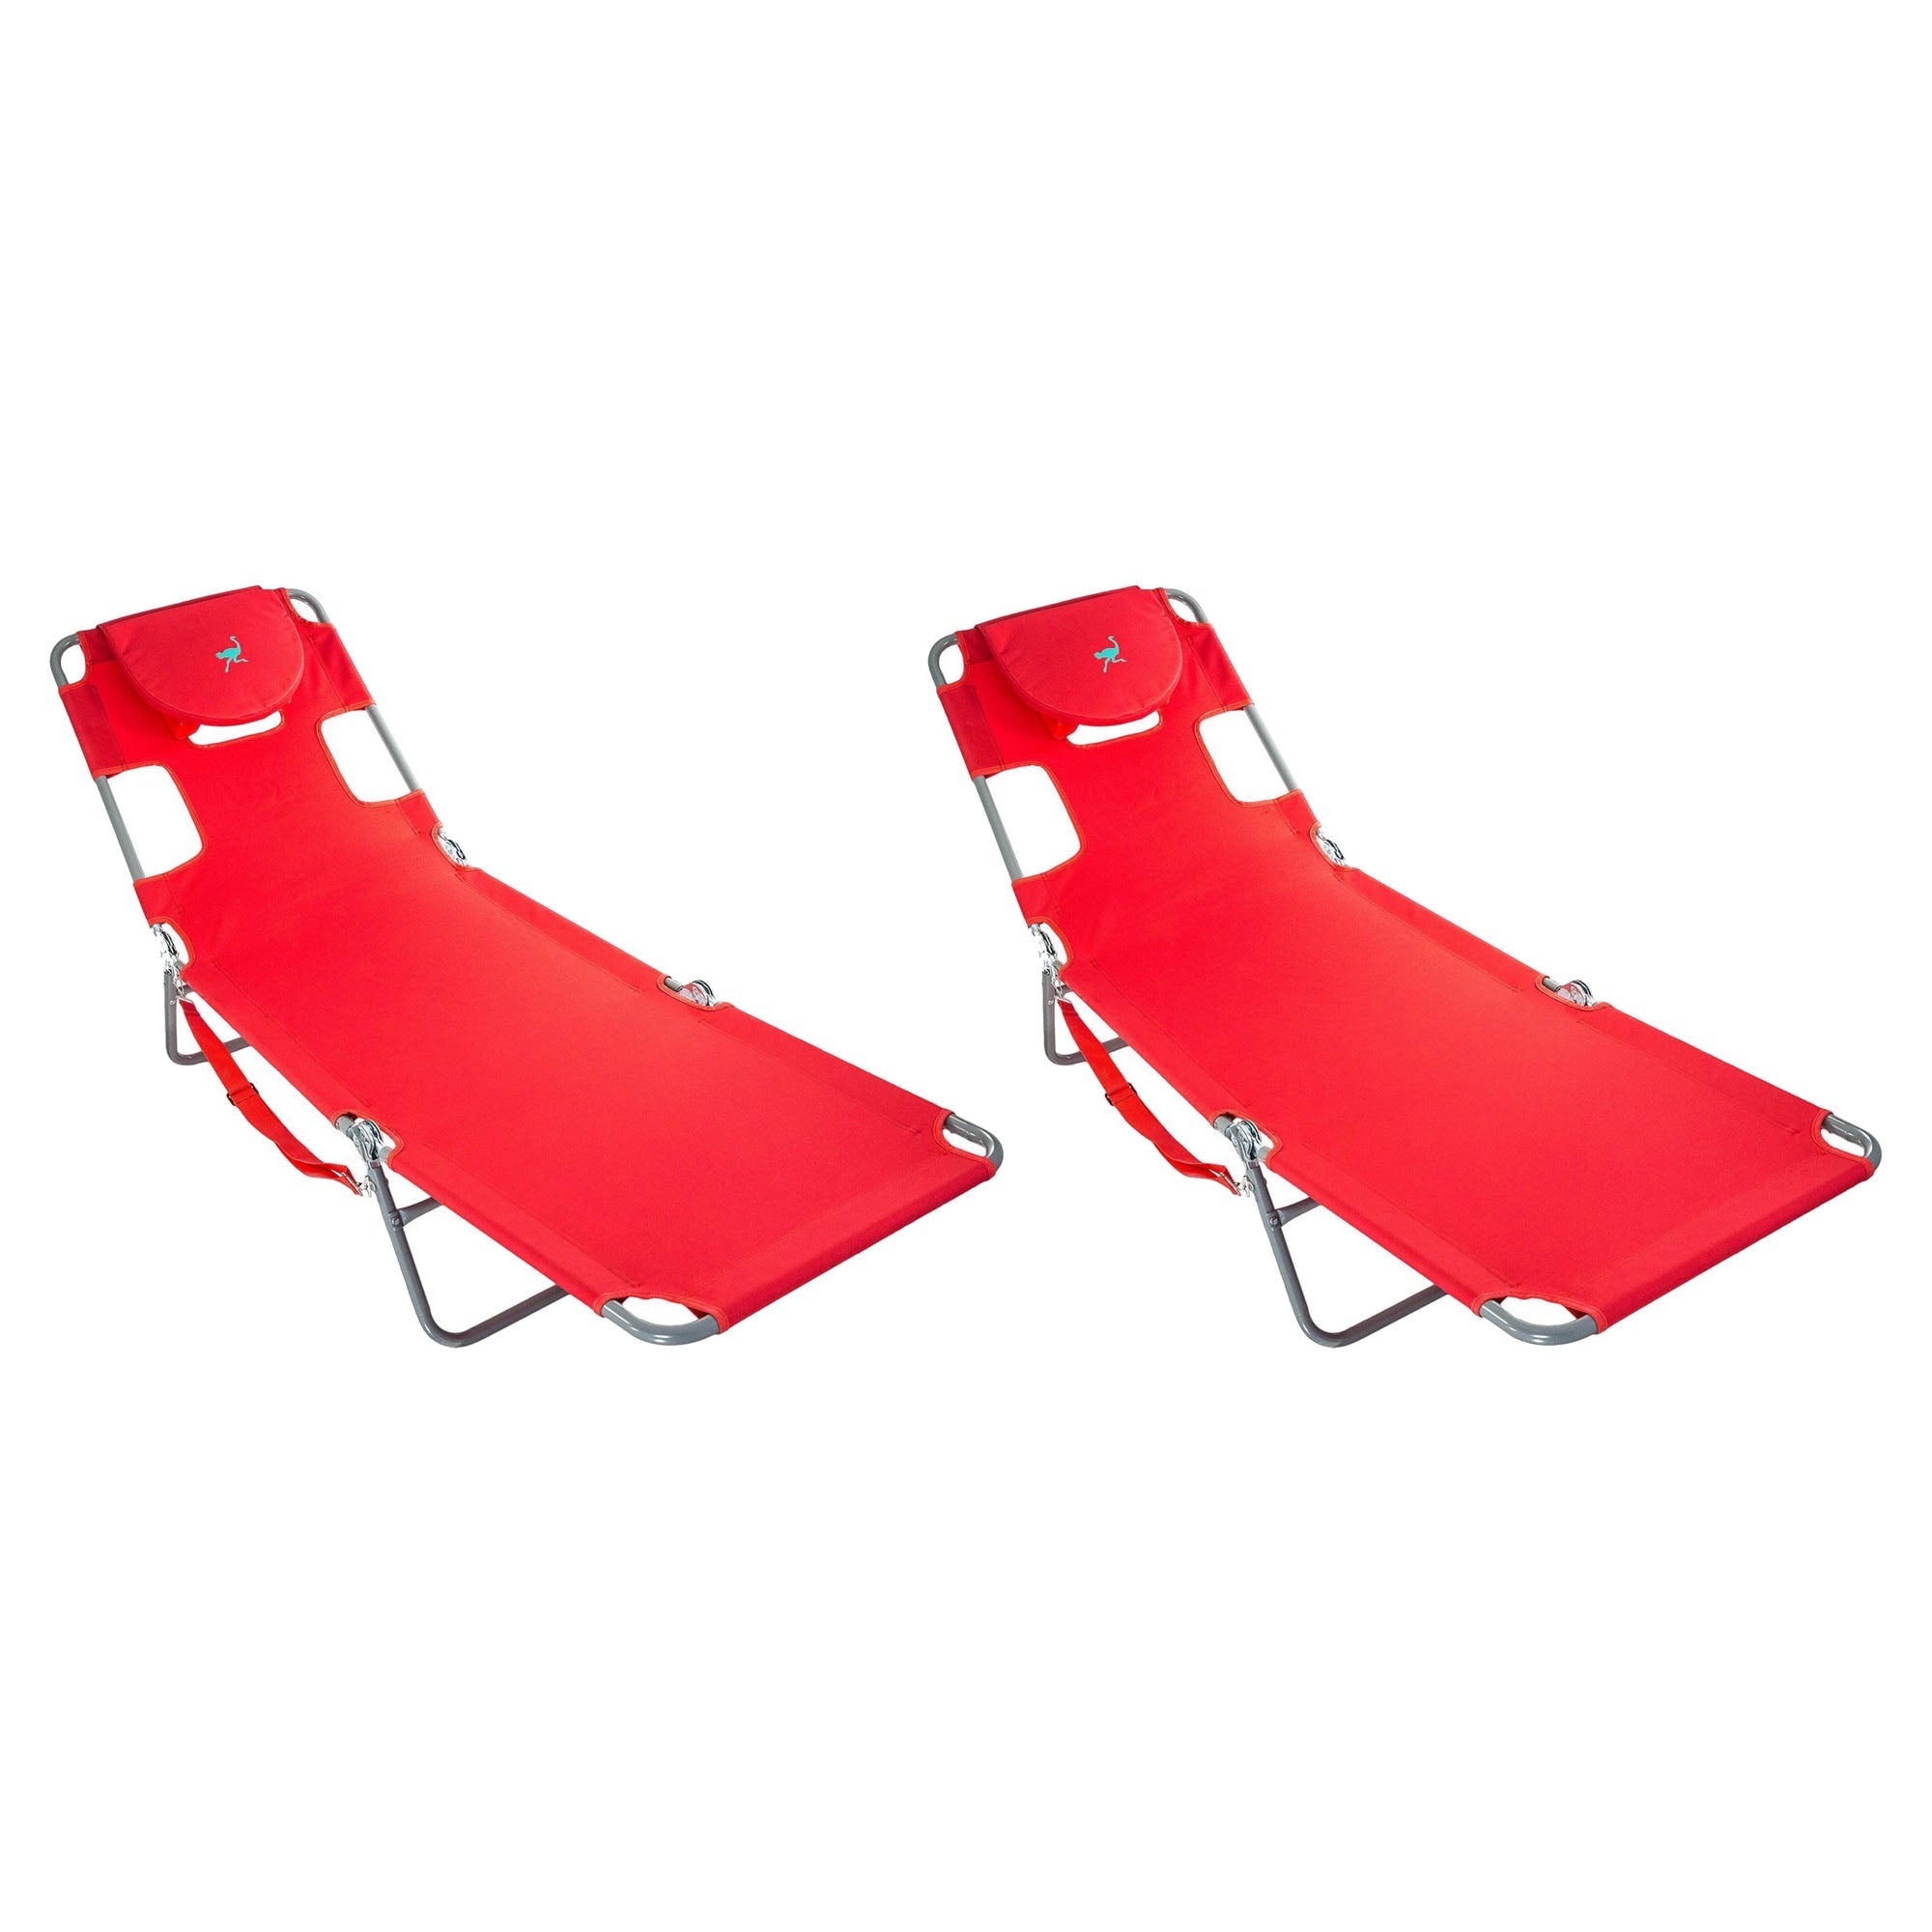 Ostrich-Chaise-Lounge-Folding-Portable-Sunbathing-Poolside-Beach-Chair-(2-Pack)-Chairs-&-Seating